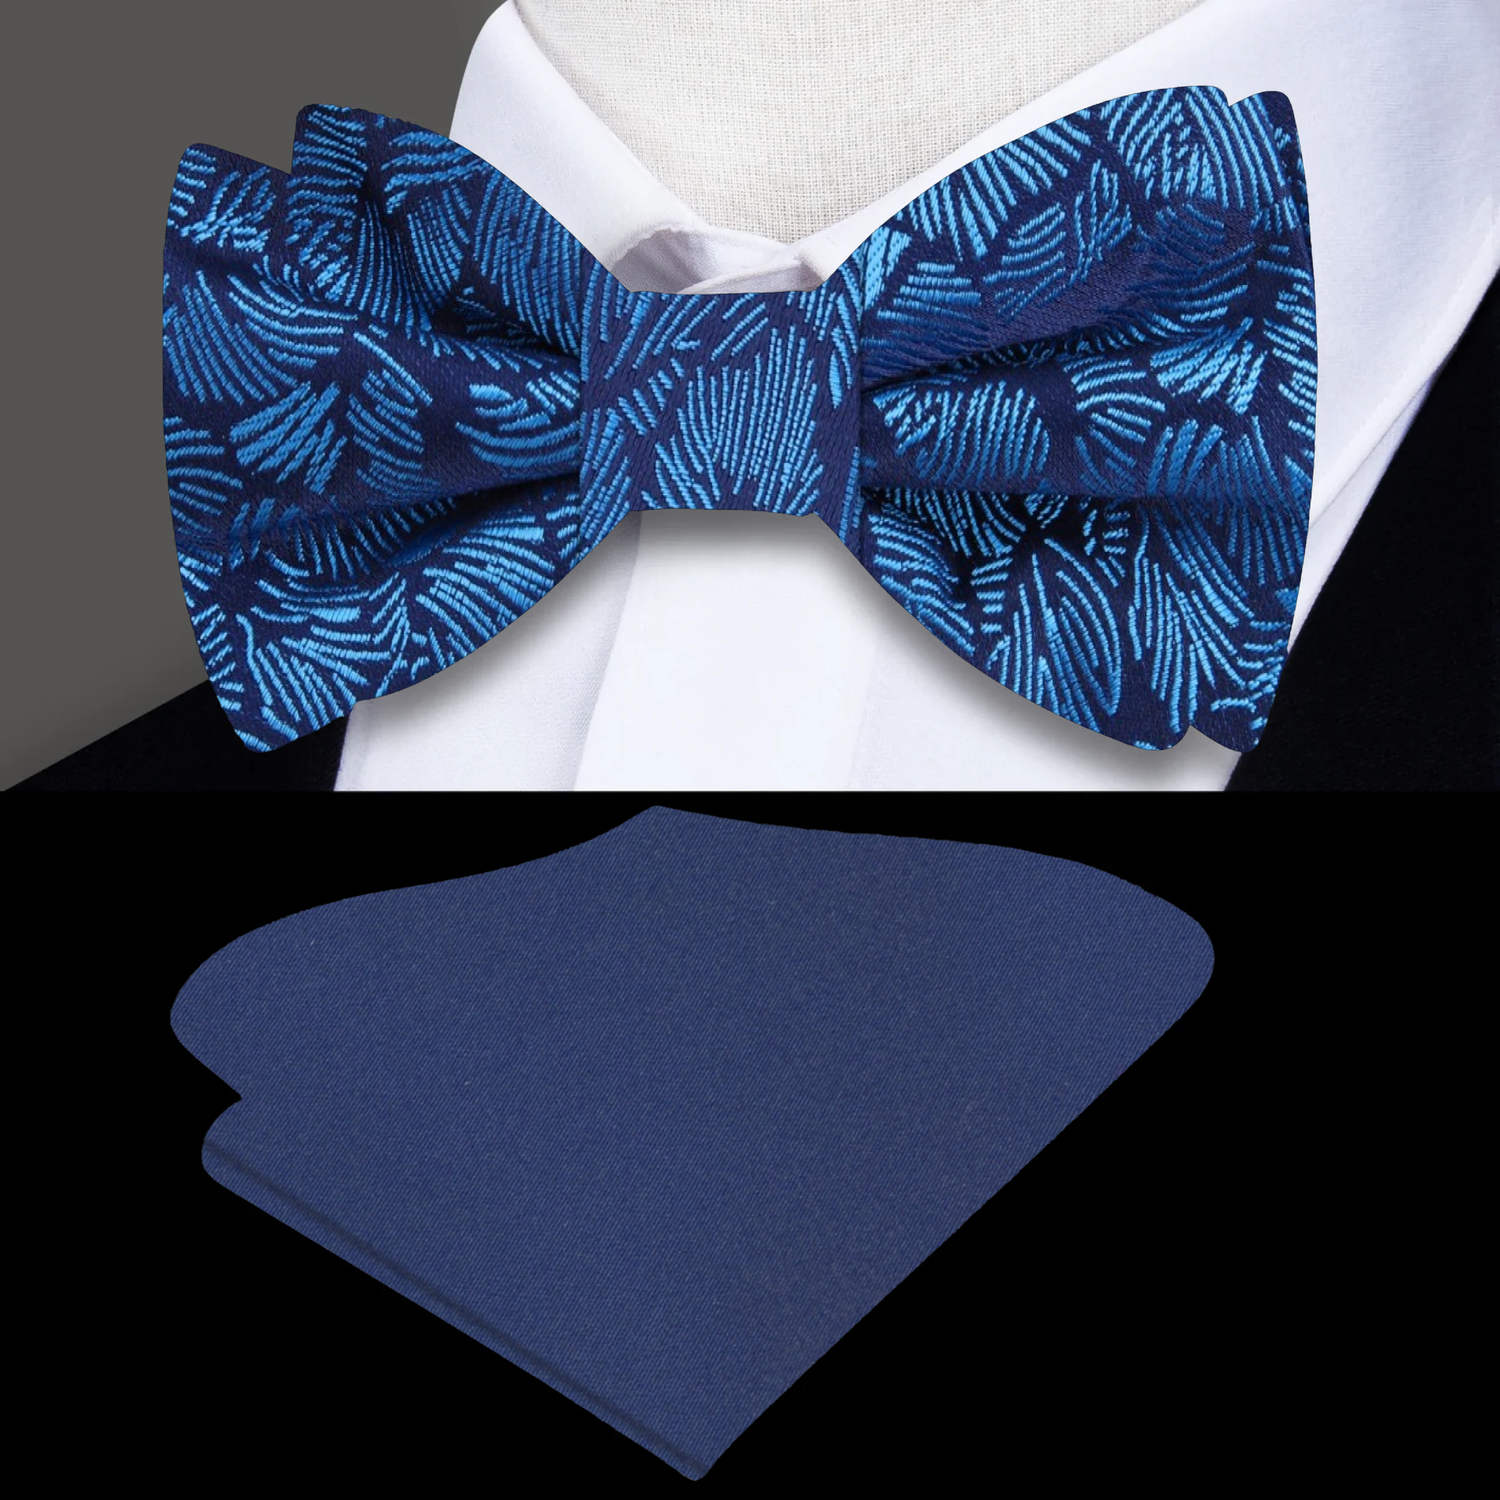 Dark Blue, Blue Sketched Palm Leaves Bow Tie and Solid Dark Blue Square